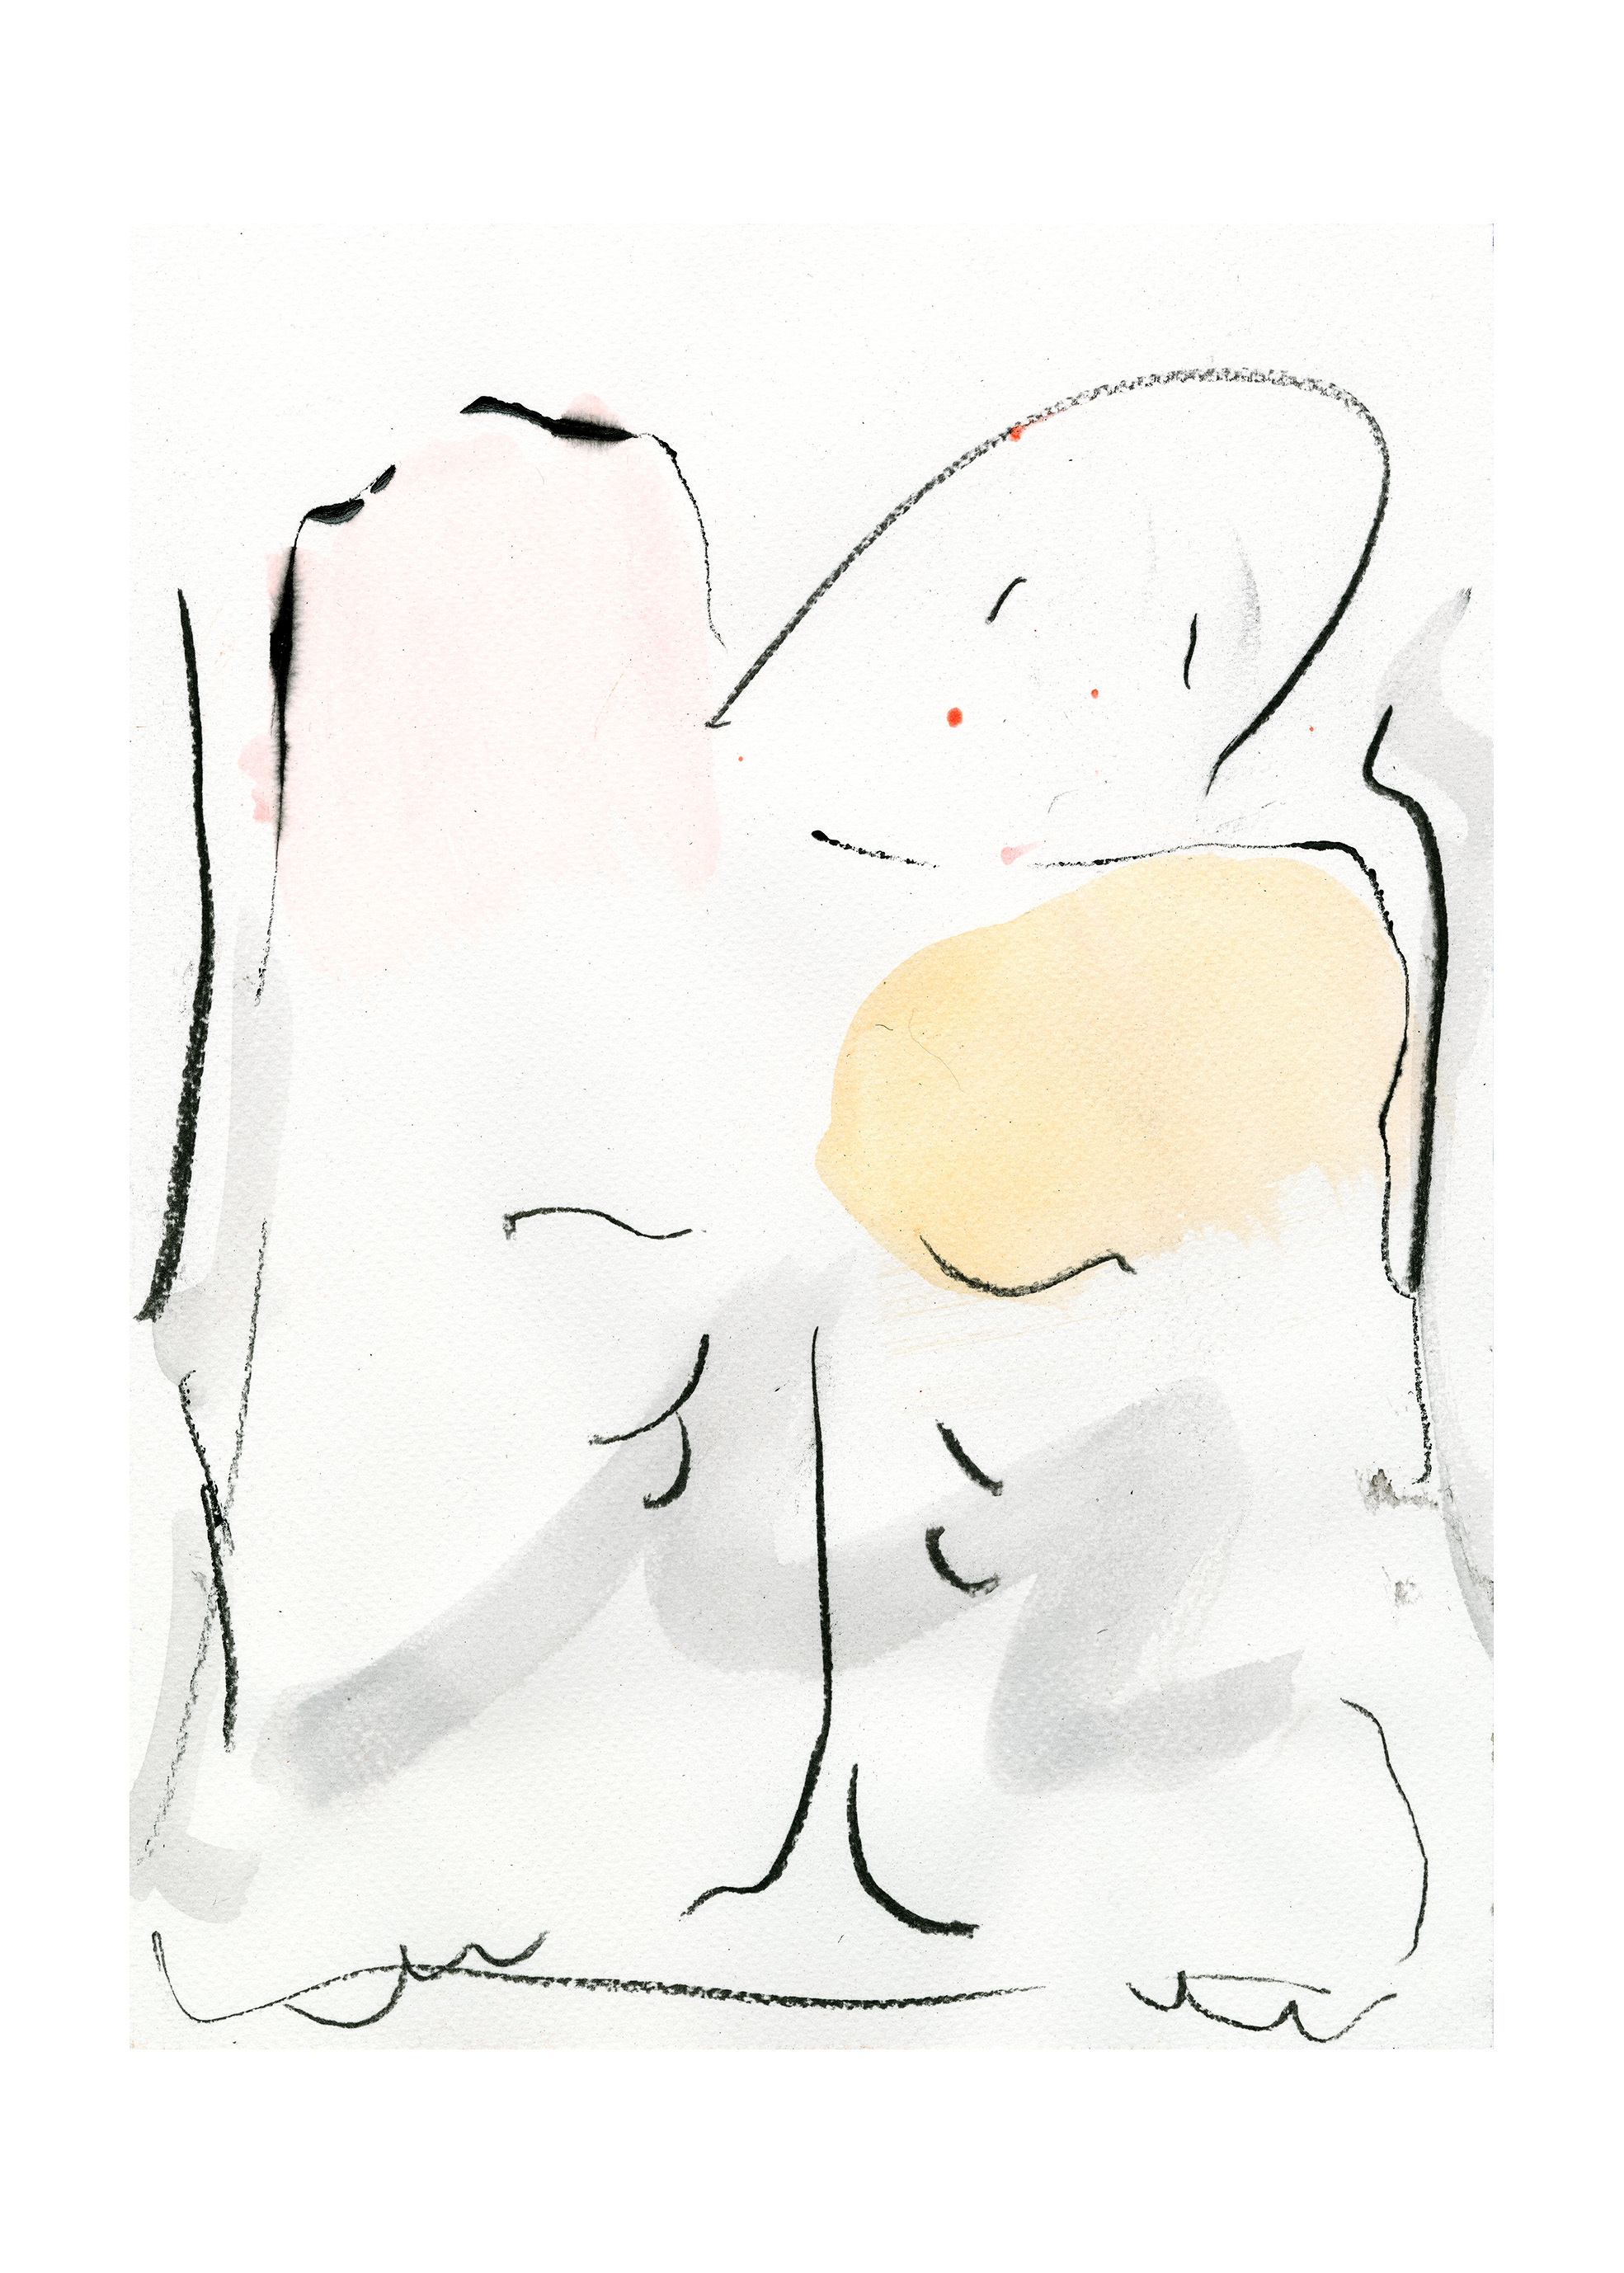   Torso (Heart)   2019  Acrylic and charcoal on watercolour paper  24 x 32 cm 